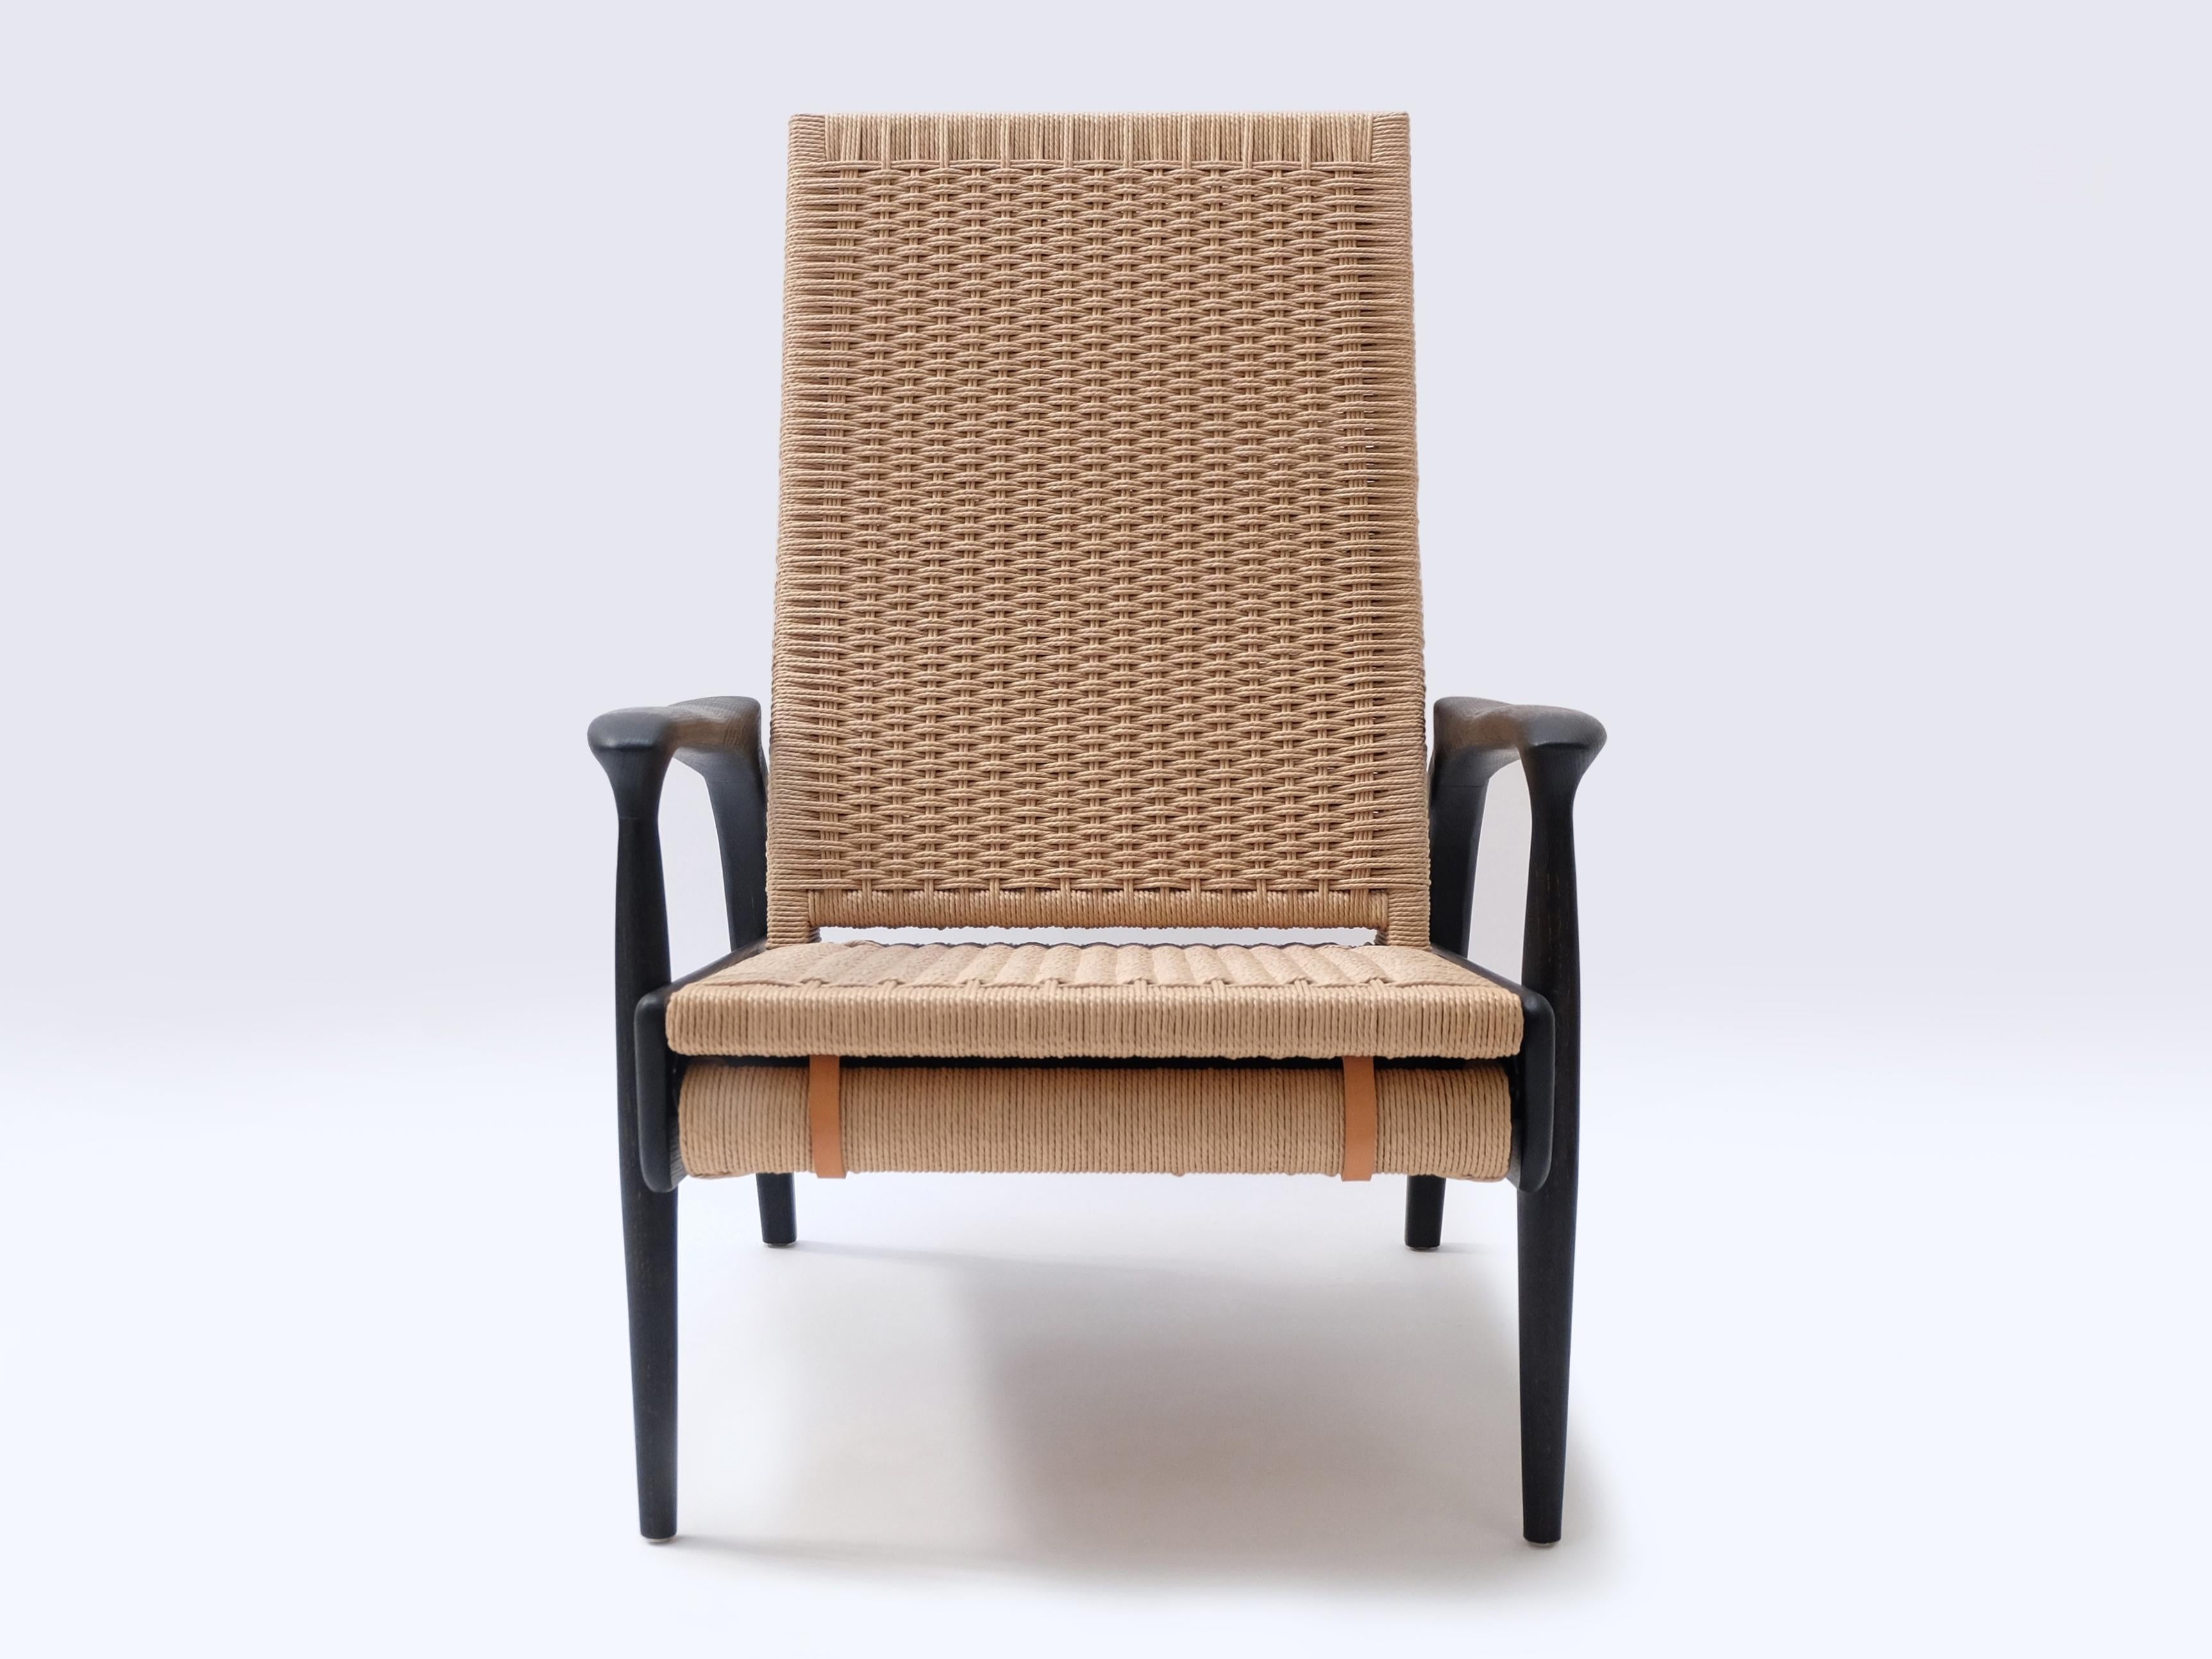 Custom-Made Handcrafted Reclining Eco Lounge Chairs FENDRIK by Studio180degree Shown in Sustainable Solid Natural Blackened Oak and Contrasting Original Natural Danish Cord

Noble - Tactile – Refined - Sustainable
Reclining Eco lounge chair FENDRIK